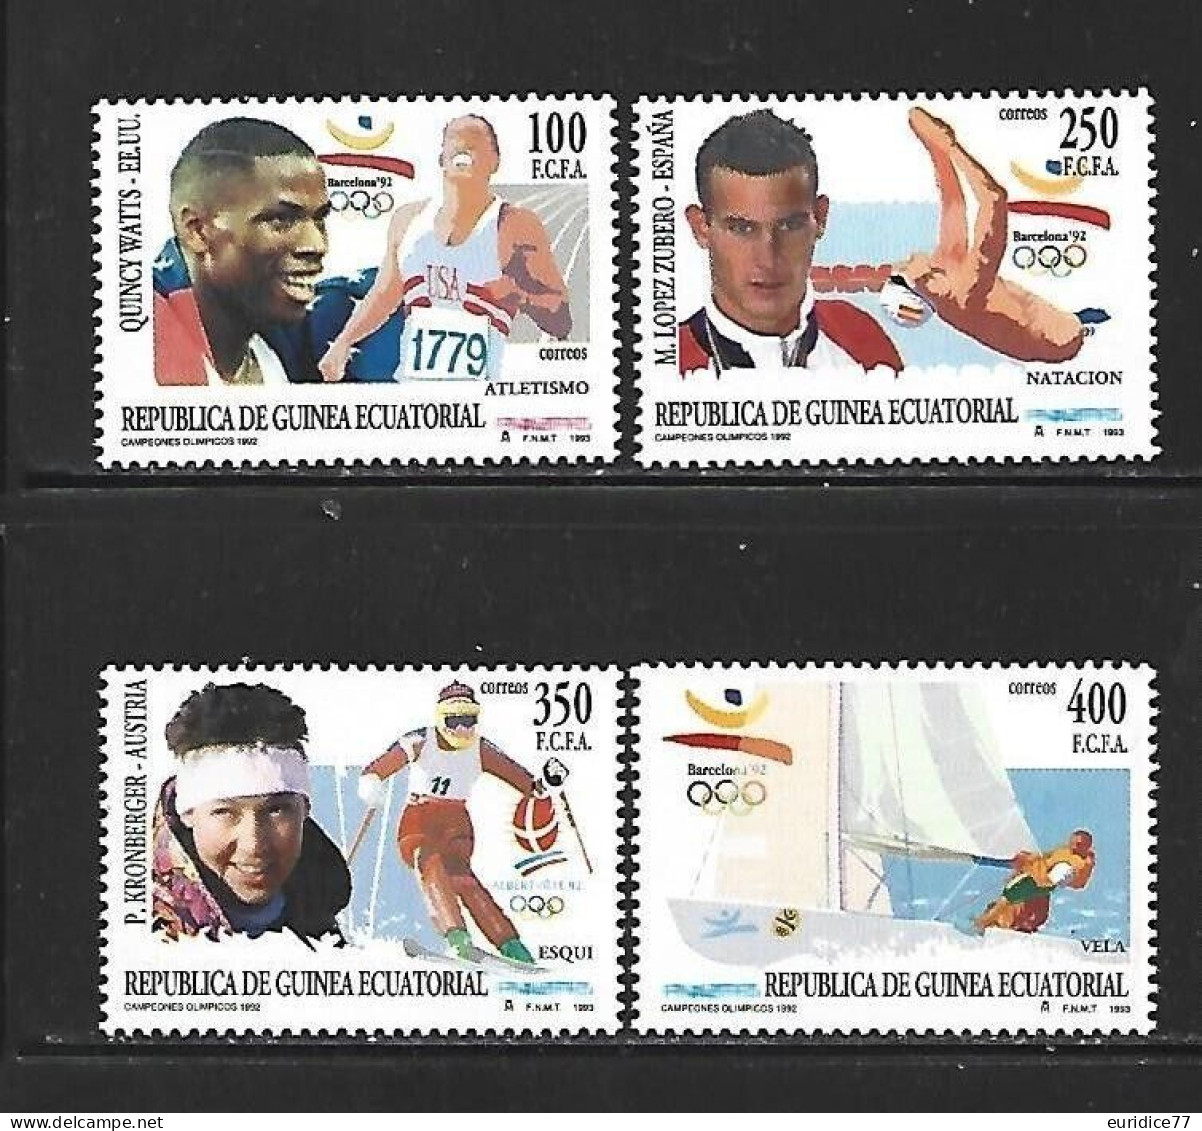 Guinea Ecuatorial 1993 - Olympic Games Barcelona 92 Mnh** - Sommer 1992: Barcelone